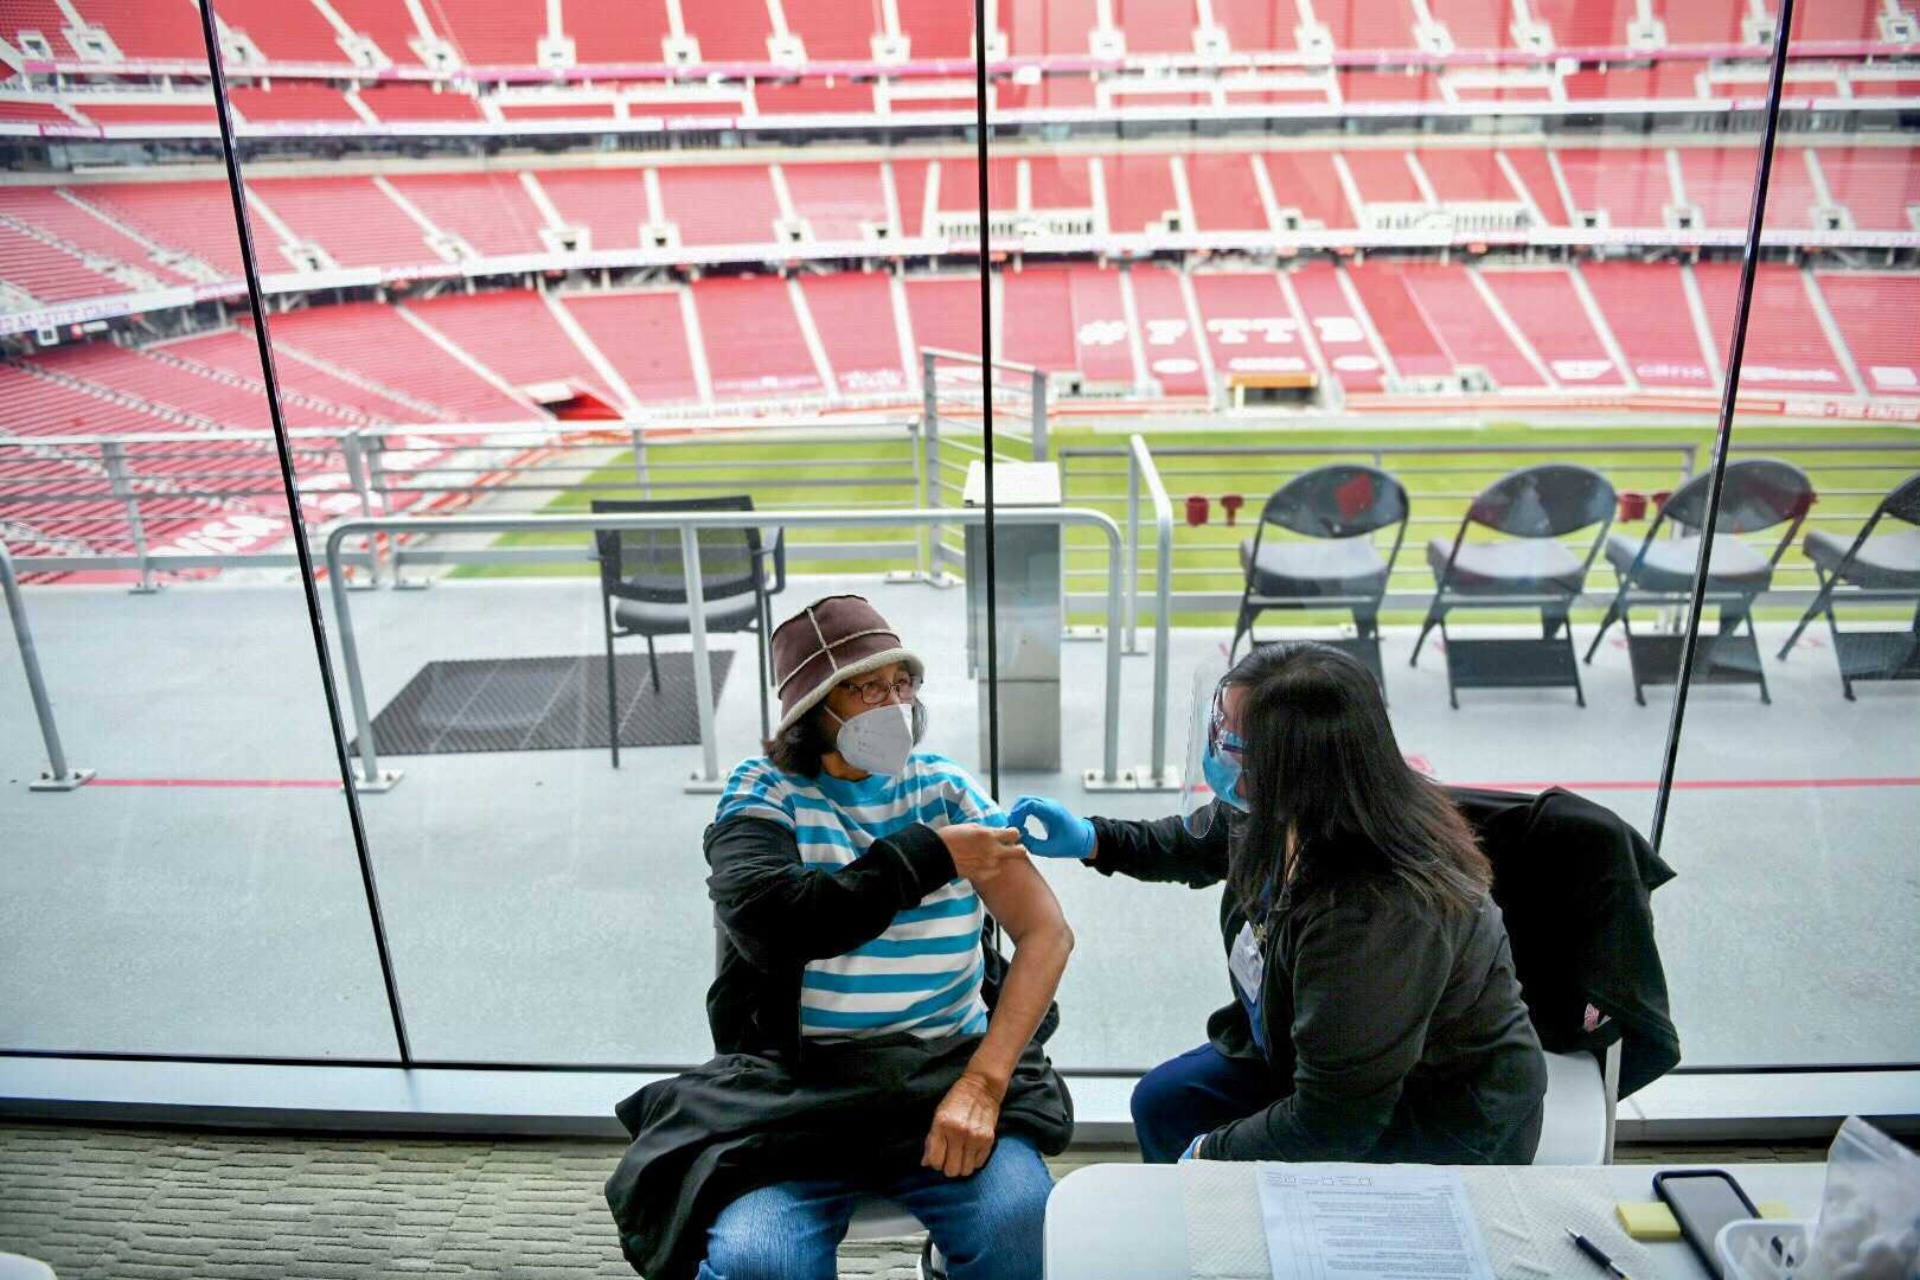 California's Largest COVID-19 Vaccination Site Opens for Business at 49ers' Levi's  Stadium in Santa Clara | KQED